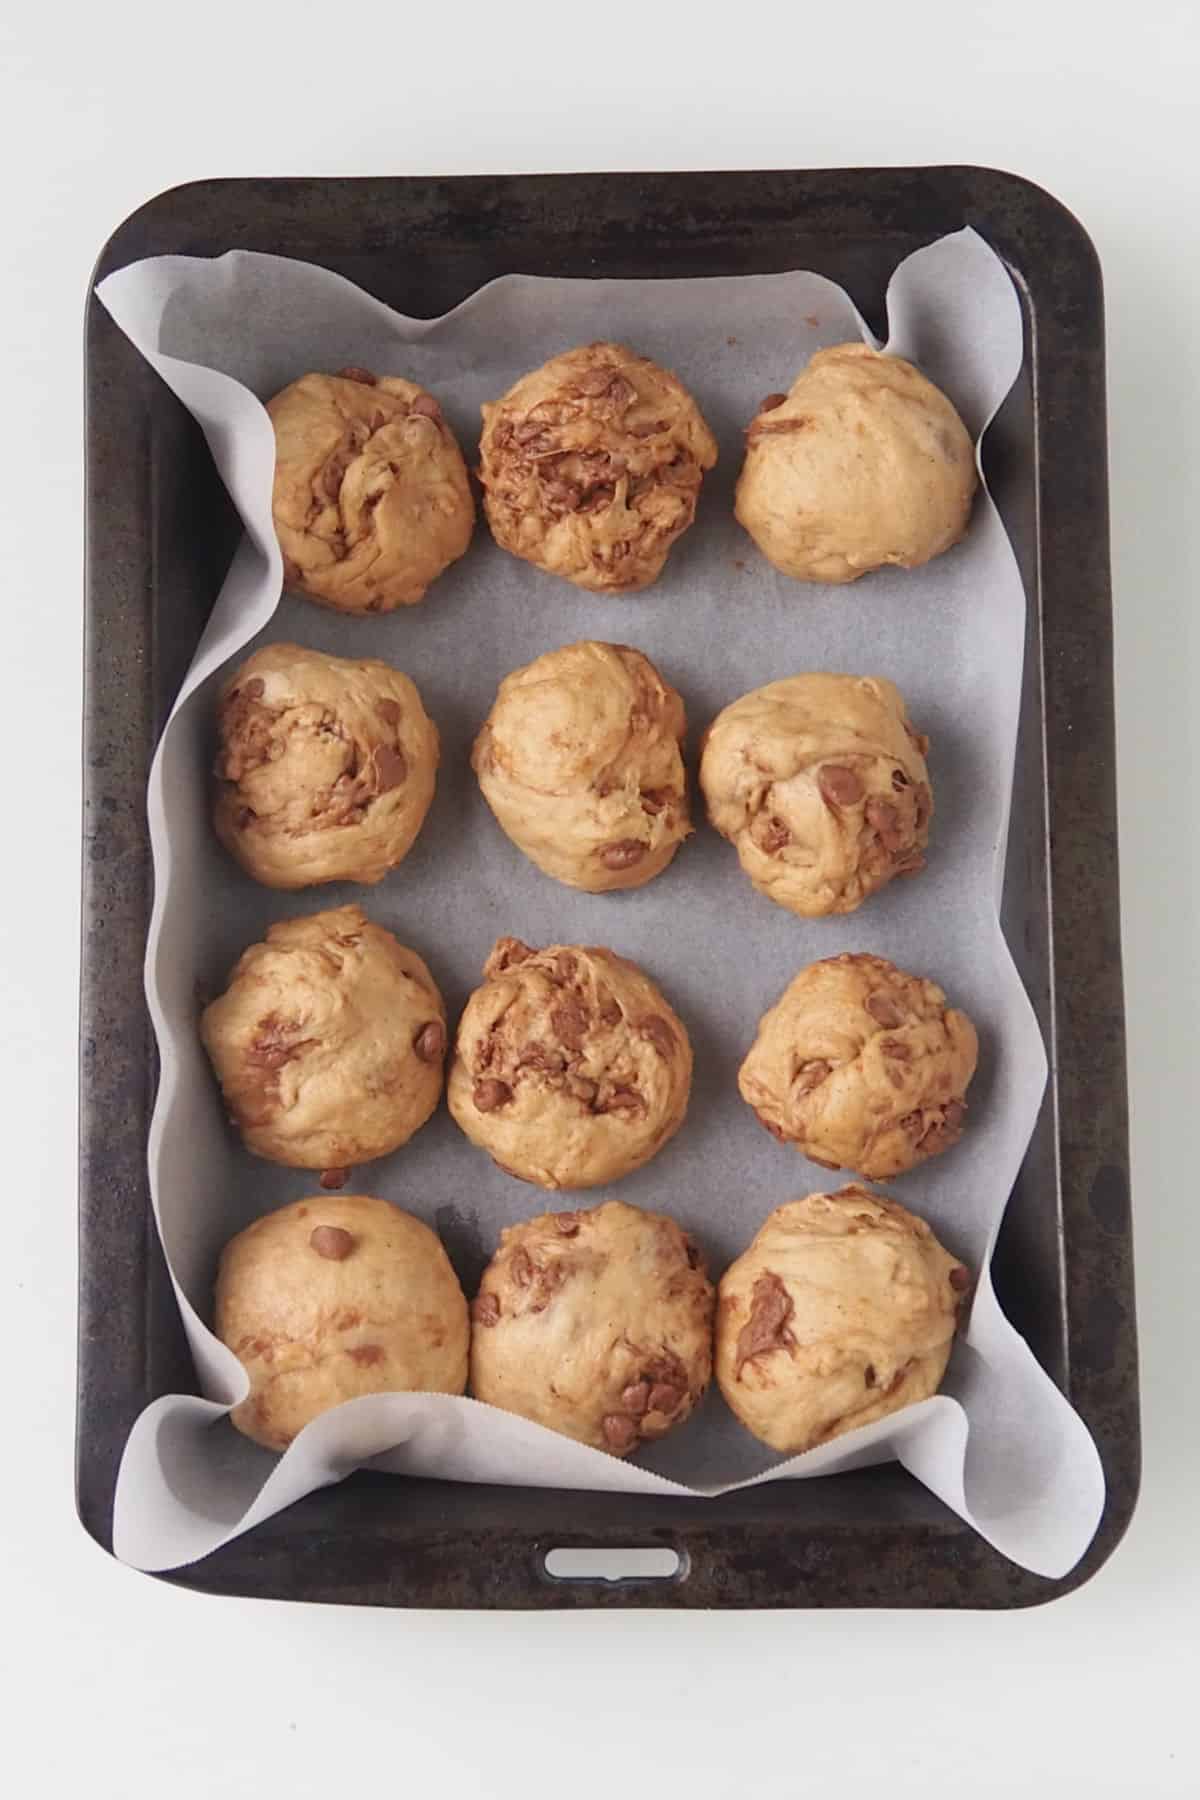 Chocolate Chip Hot Cross Buns on a baking tray.